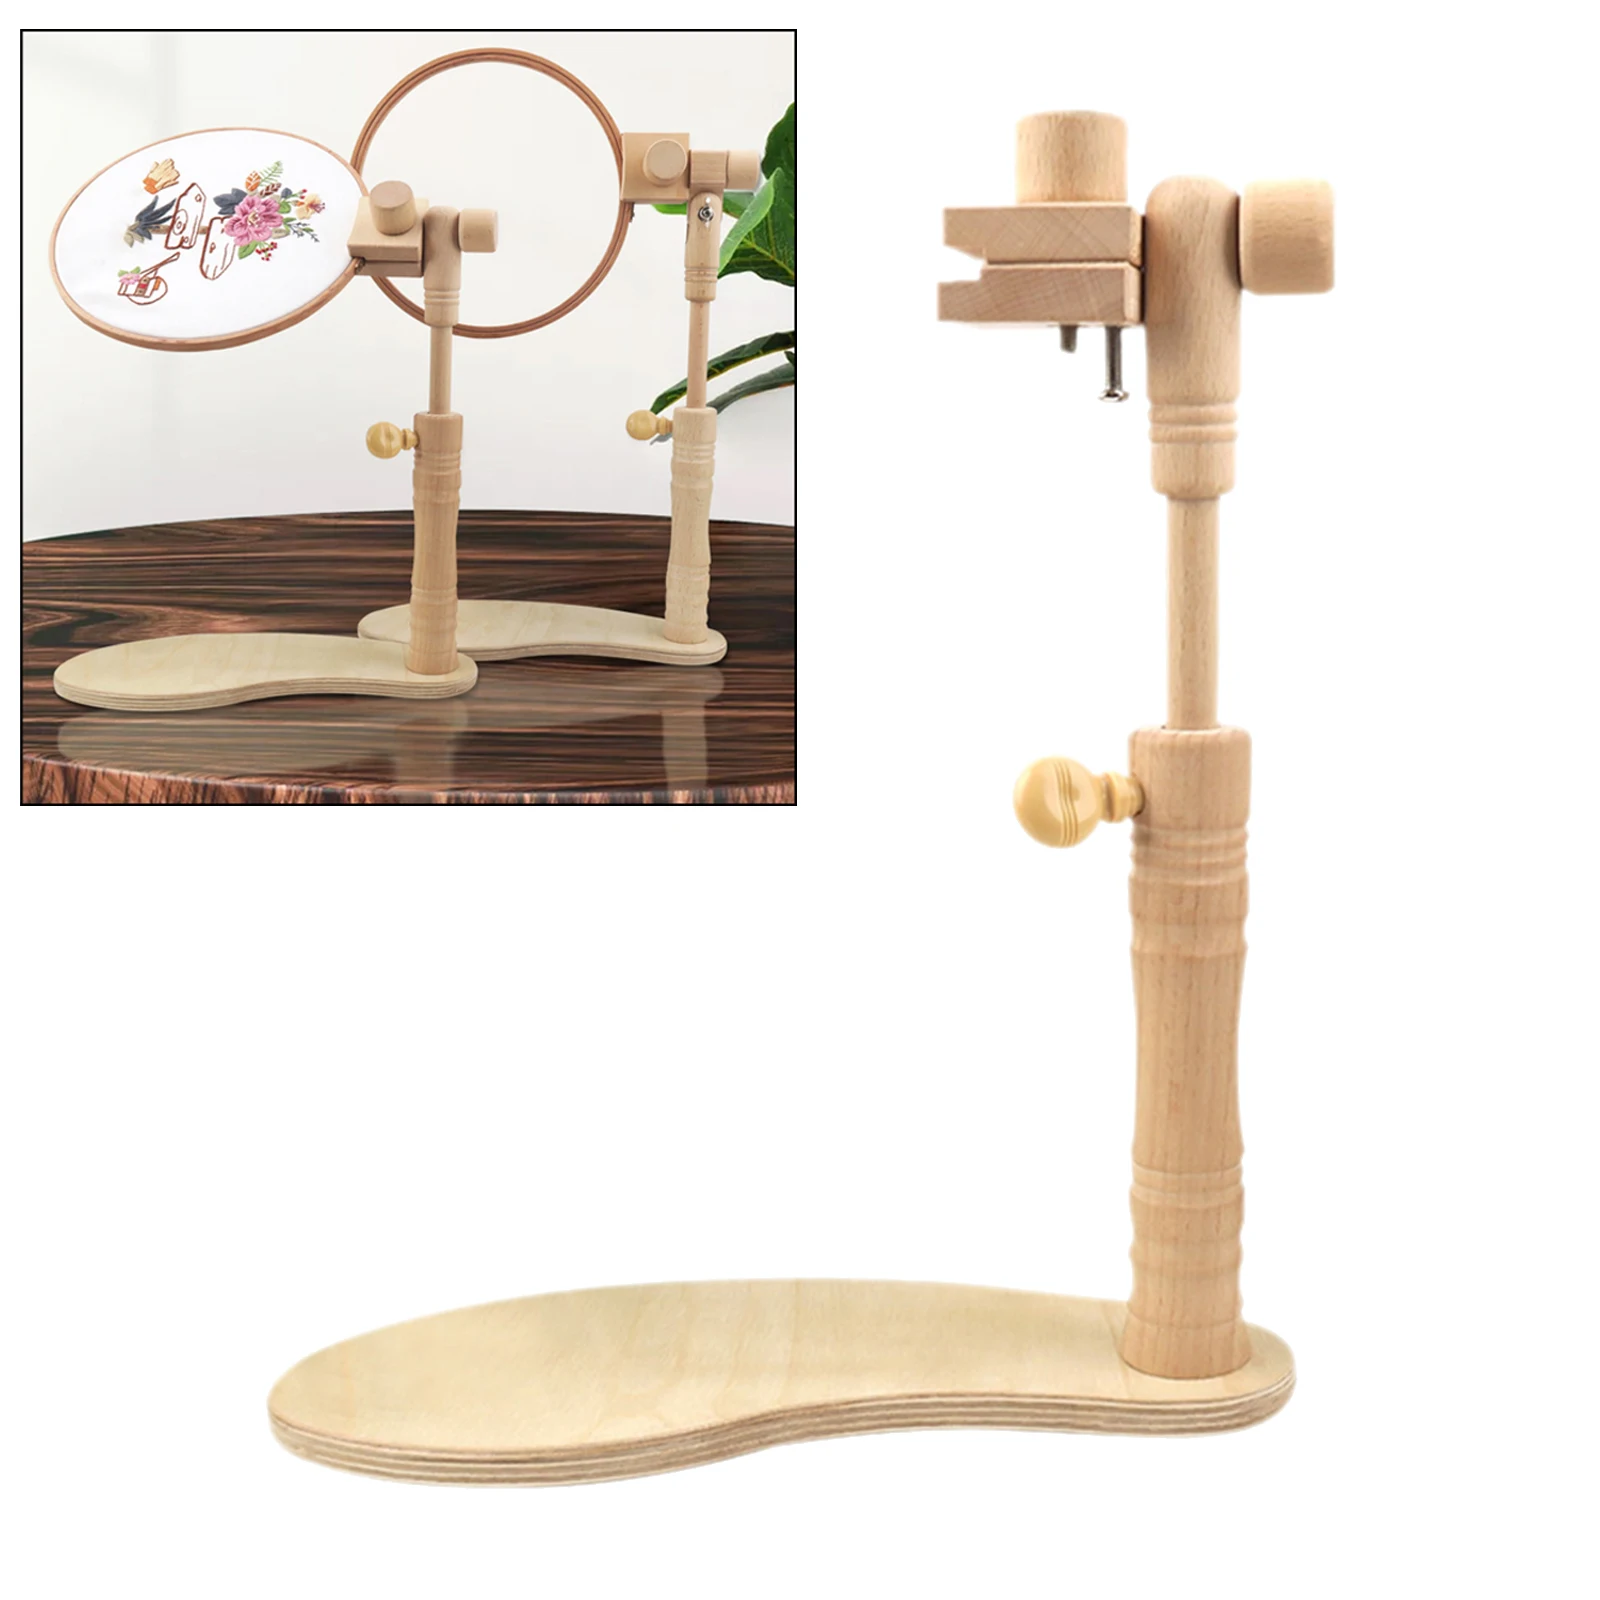 Adjustable Wooden Embroidery Lap Stand Tapestry Frame Cross Stitch Rack Holder Tabletop DIY Sewing Hoop Tools